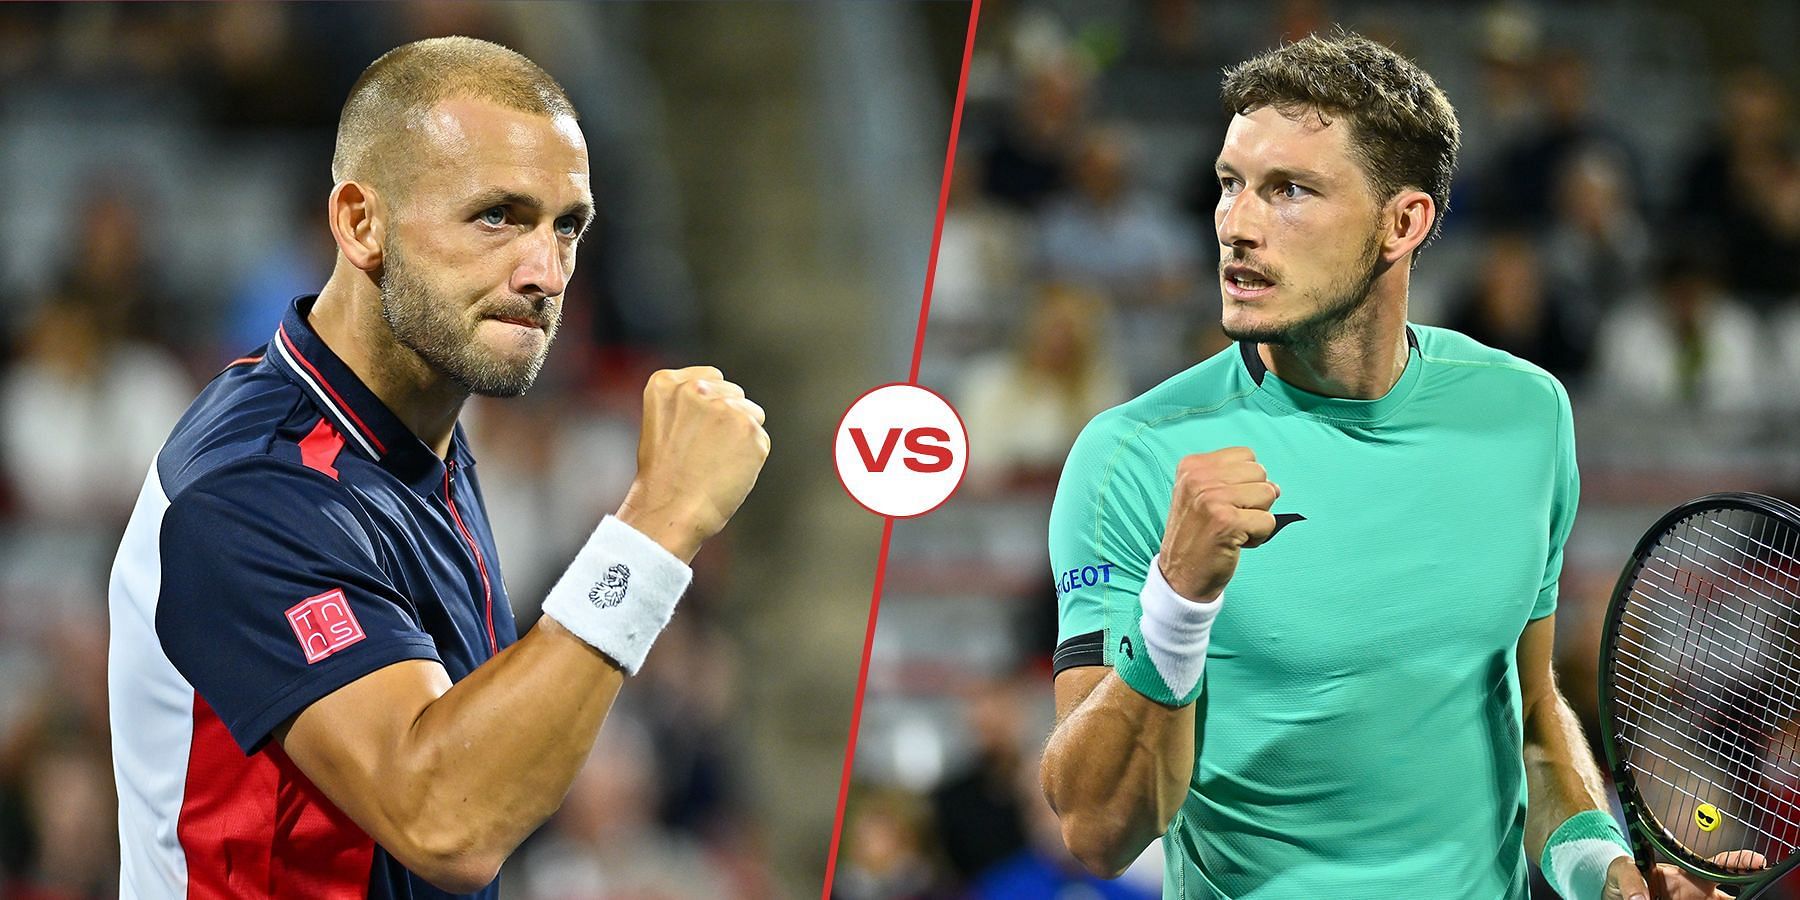 Dan Evans will face Pablo Carreno Busta in the semifinals of the Canadian Open